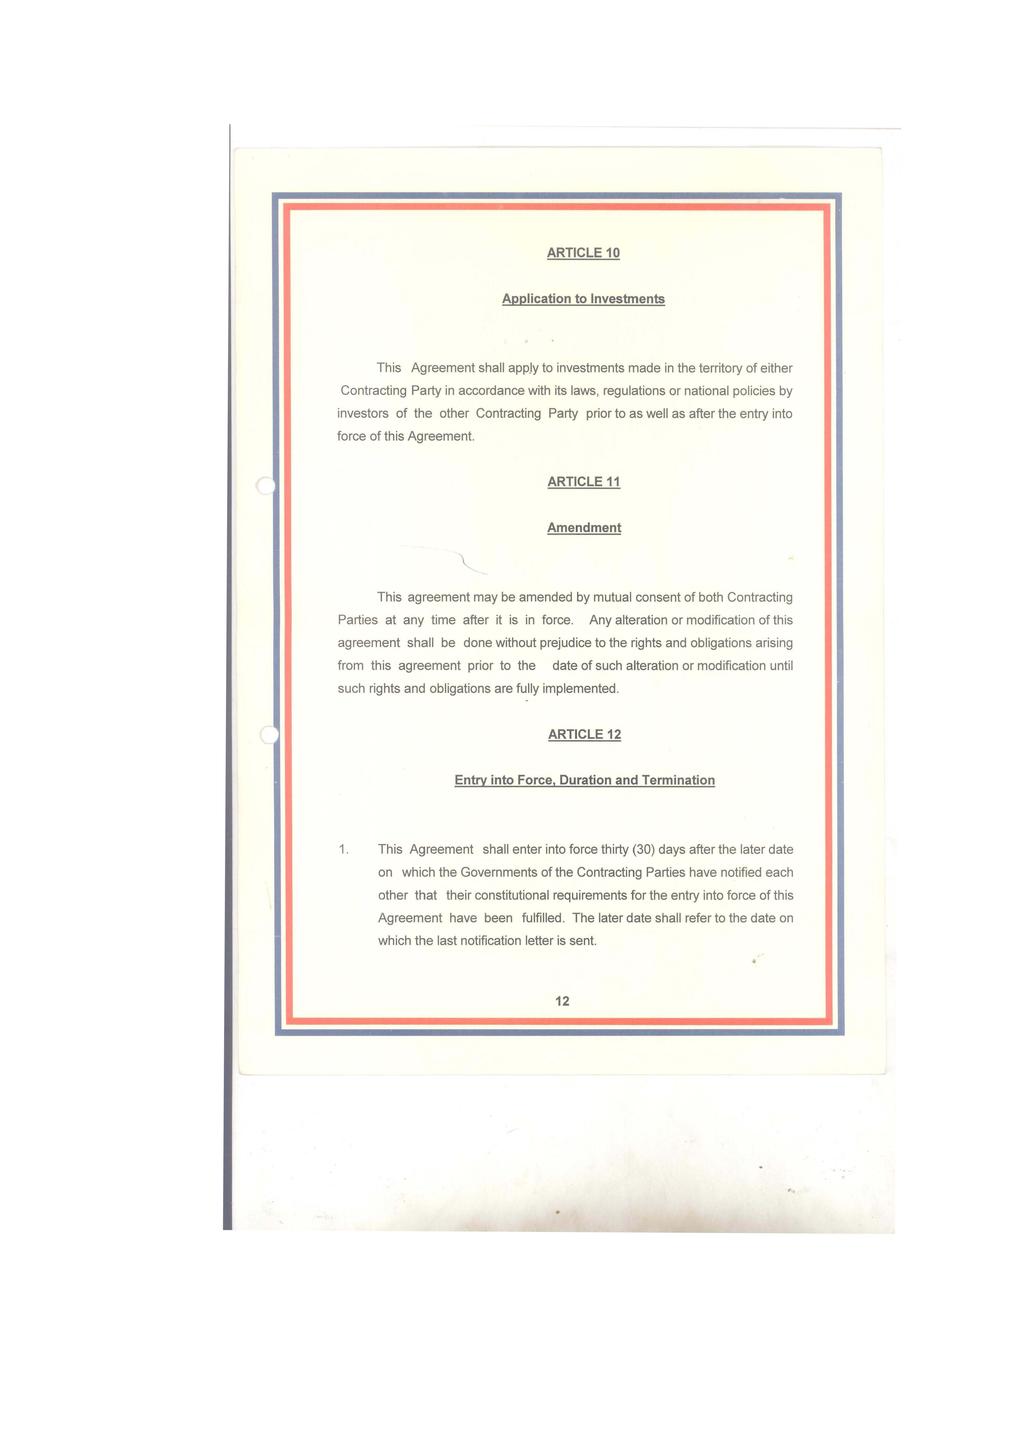 ARTICLE 10 Application to Investments This Agreement shall appjy to investments made in the territory of either Contracting Party in accordance with its laws, regulations or national policies by